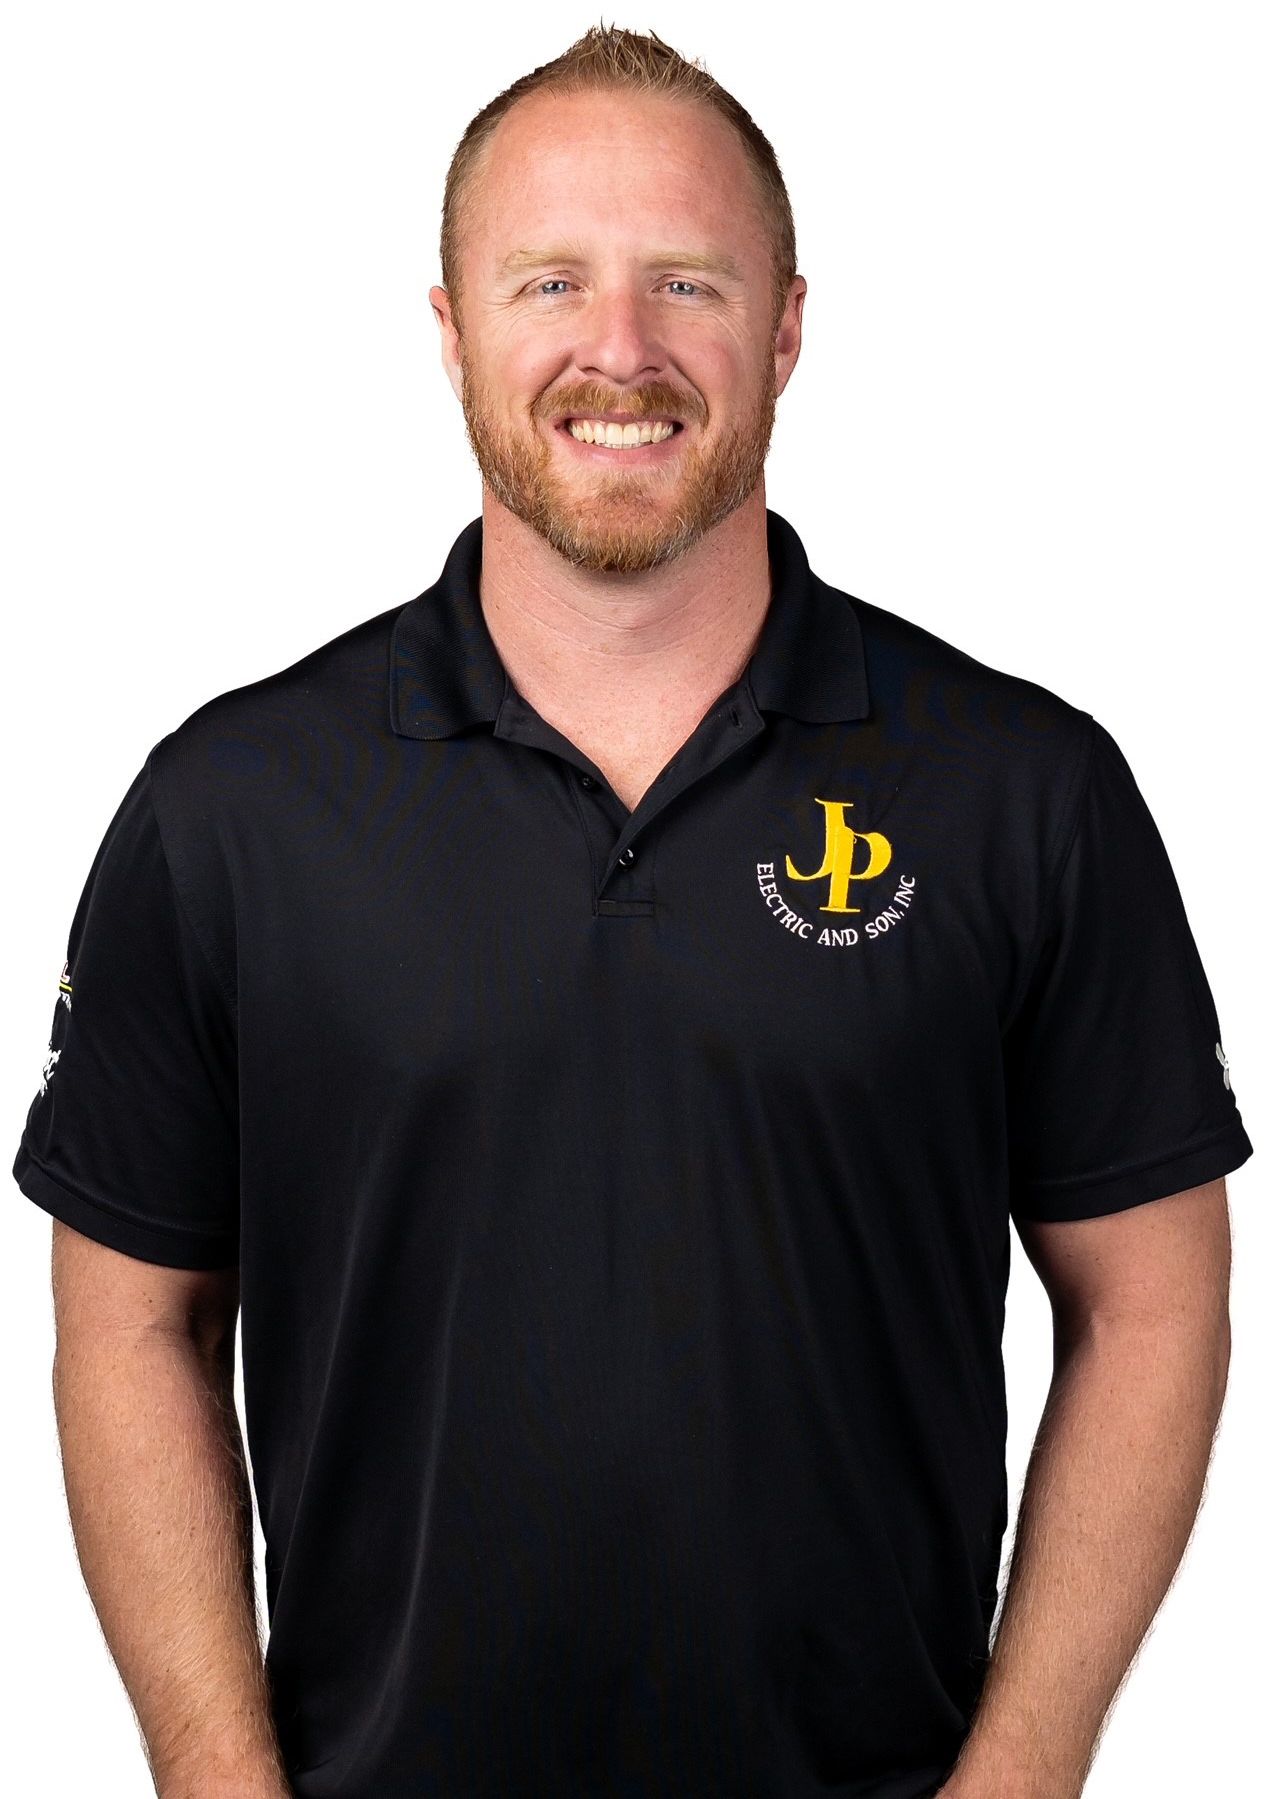 Josh Page - Local Owner and Lead Electrician